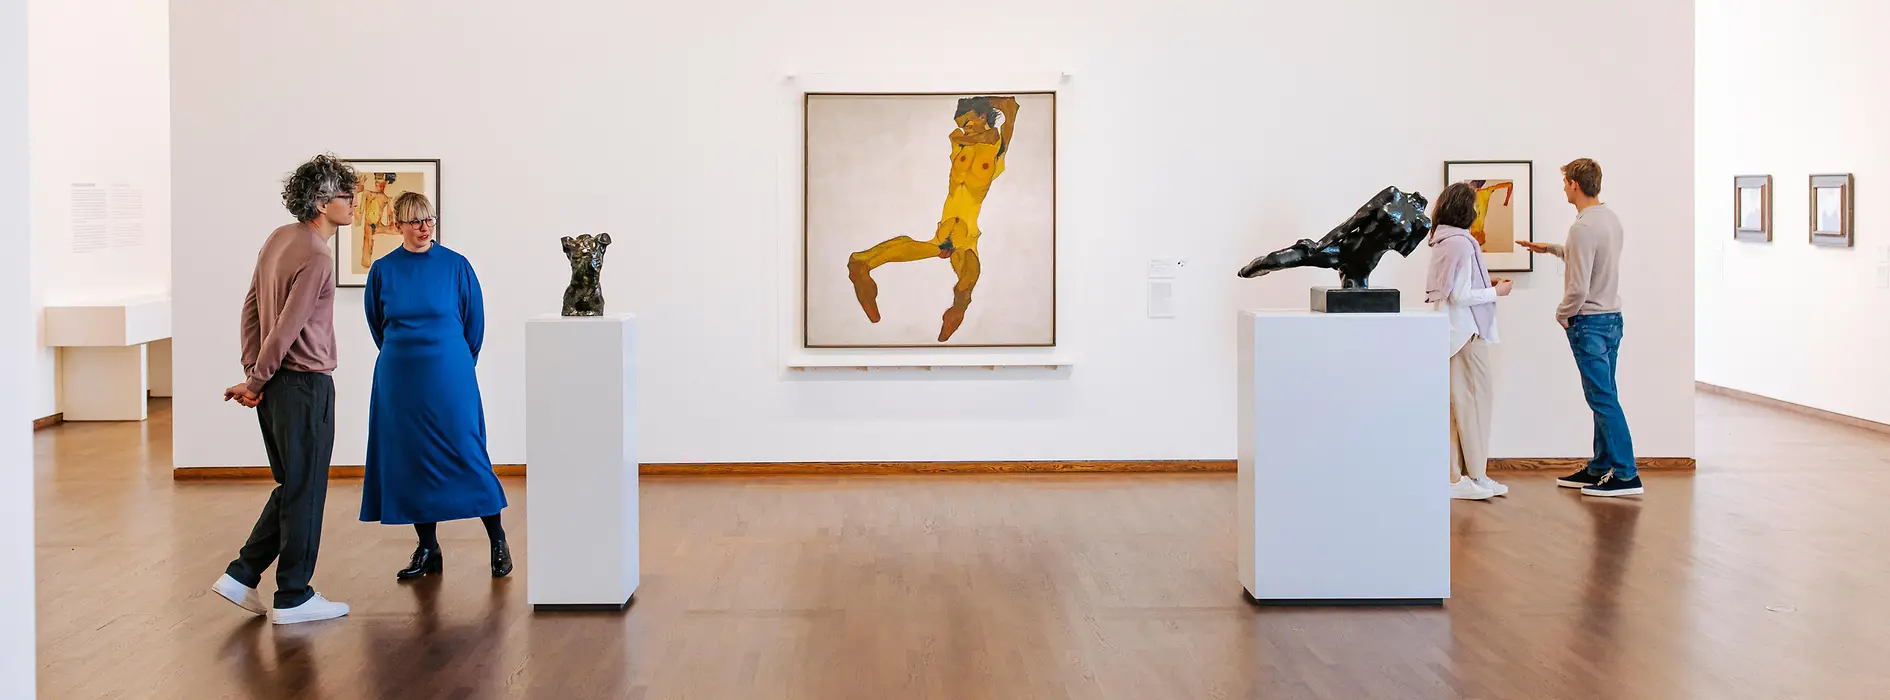 Schiele collection at the Leopold museum